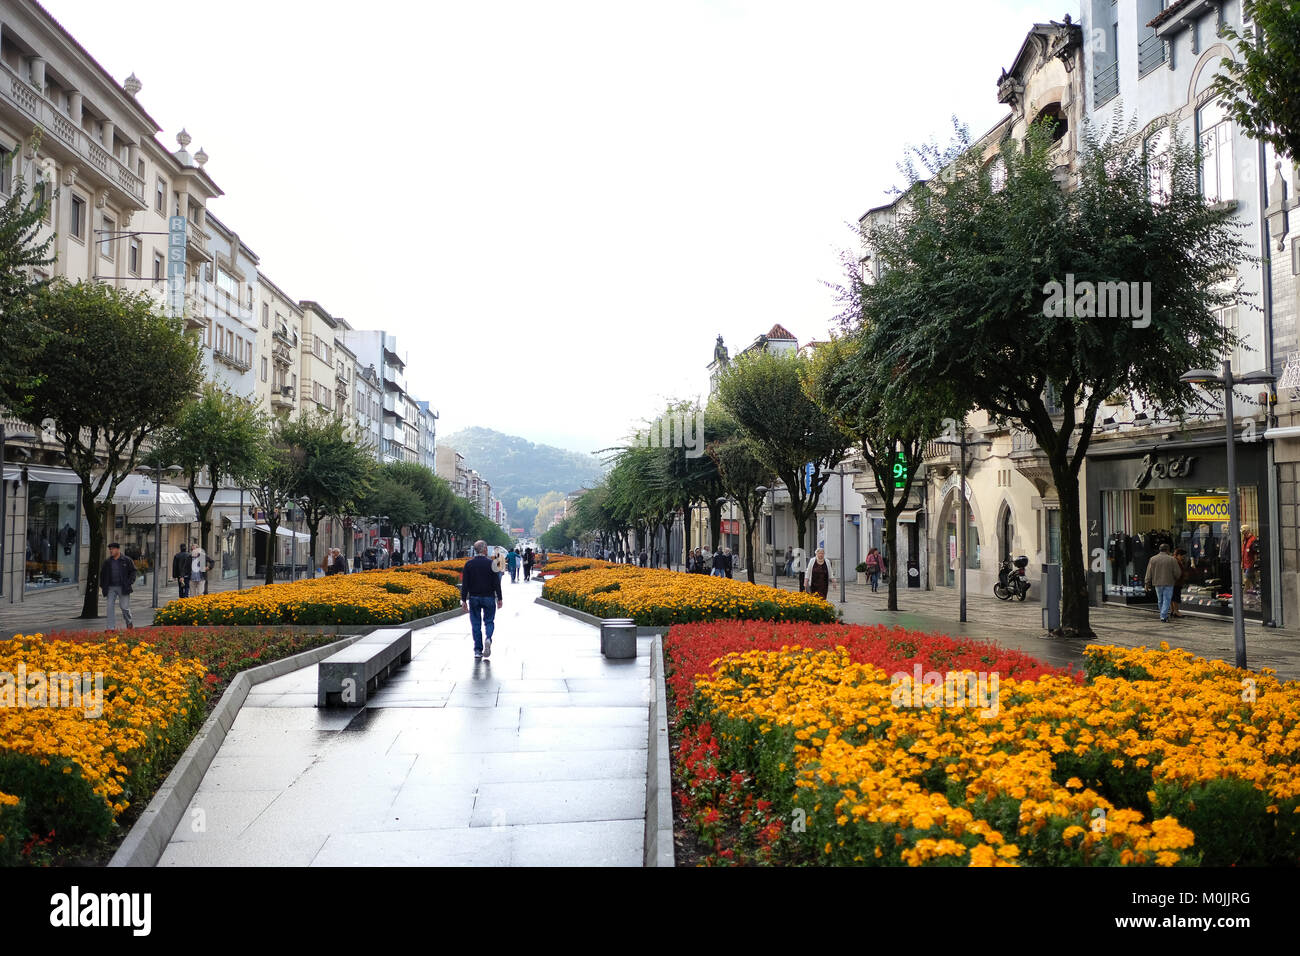 The city center of Braga, capital of Minho in the north region of Portugal has beautiful and always well preserved gardens along squares and avenues. Stock Photo